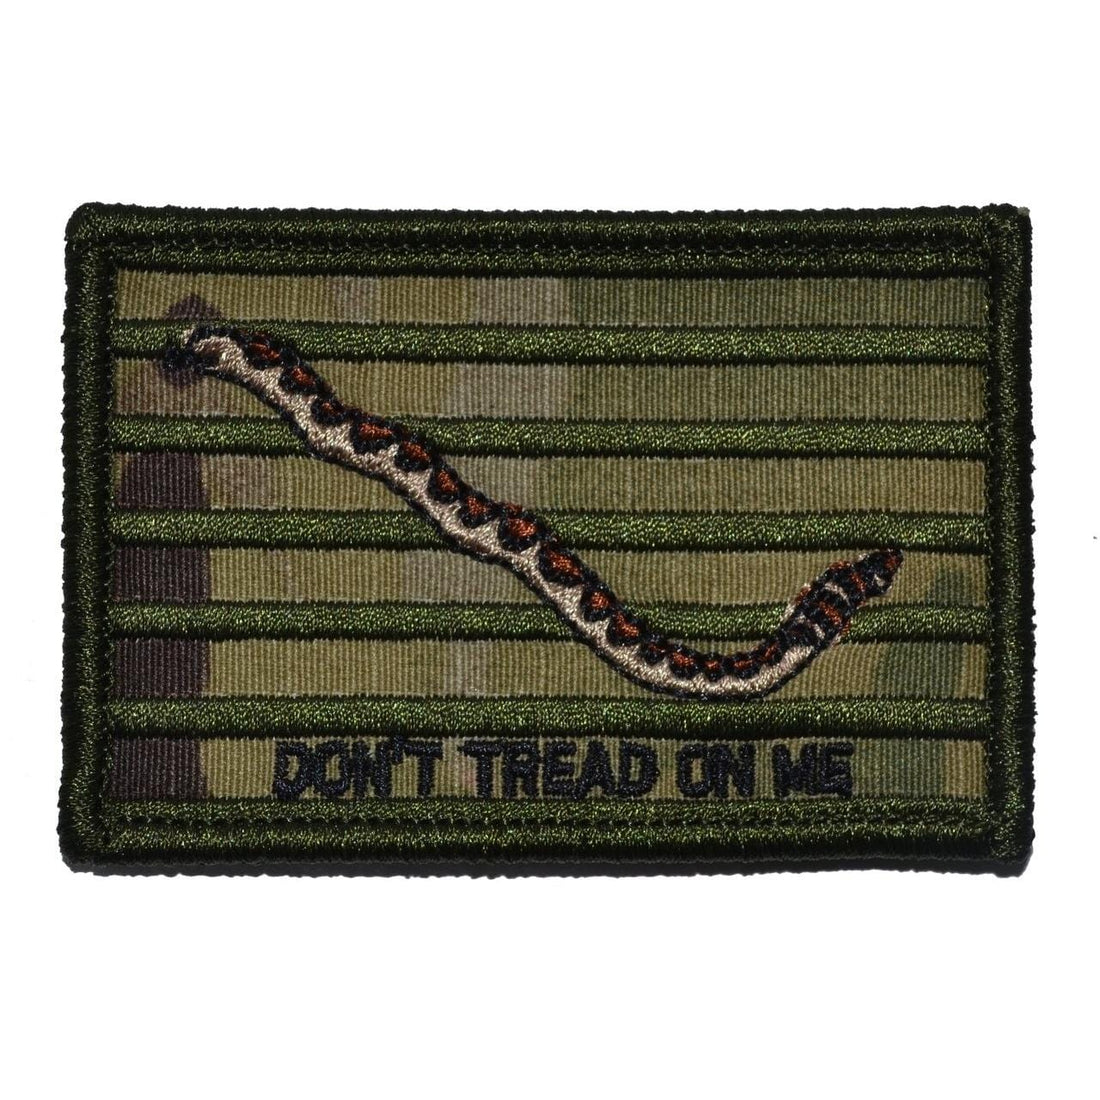 Supplies - Identification - Morale Patches - Offbase Original Gadsden Snake Don't Tread On Me DTOM Flag Patch